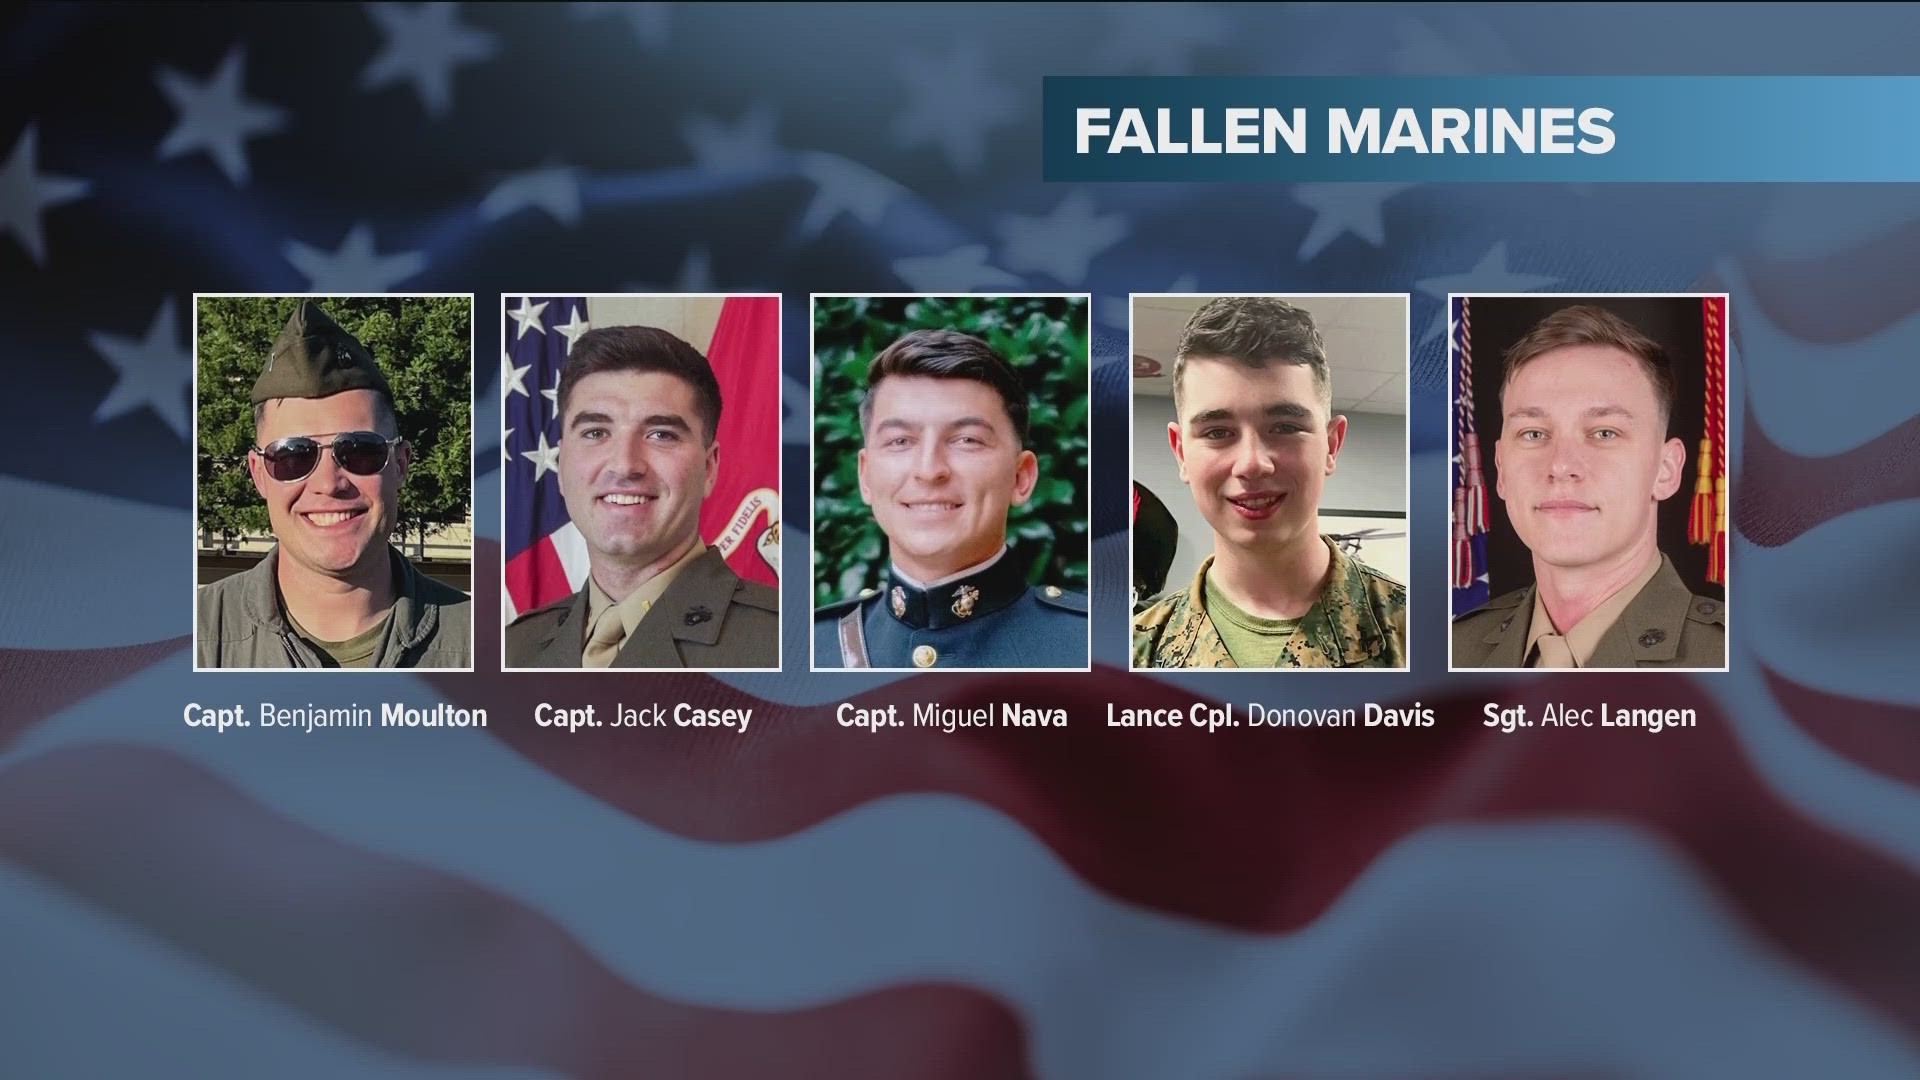 The U.S. Marine Corps has identified the five Marines killed when a helicopter went down near Pine Valley on Wednesday.